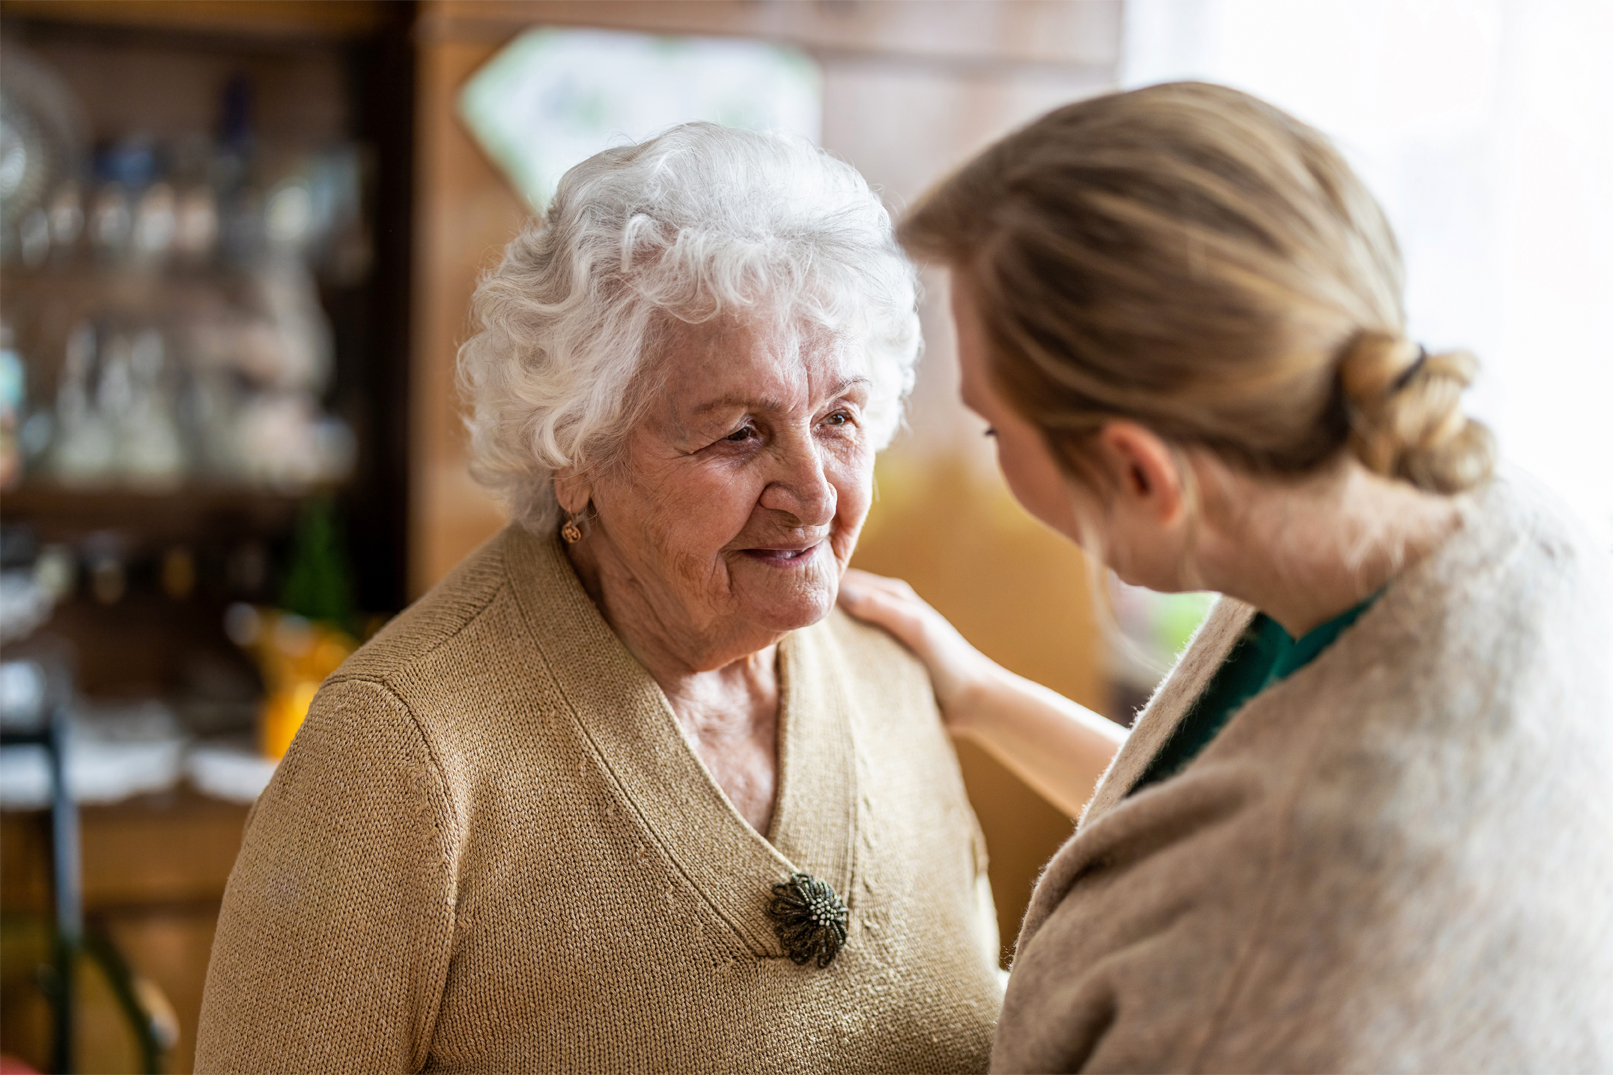 An in-home care representative visiting a client with dementia to assess the potential need for more in-home care.